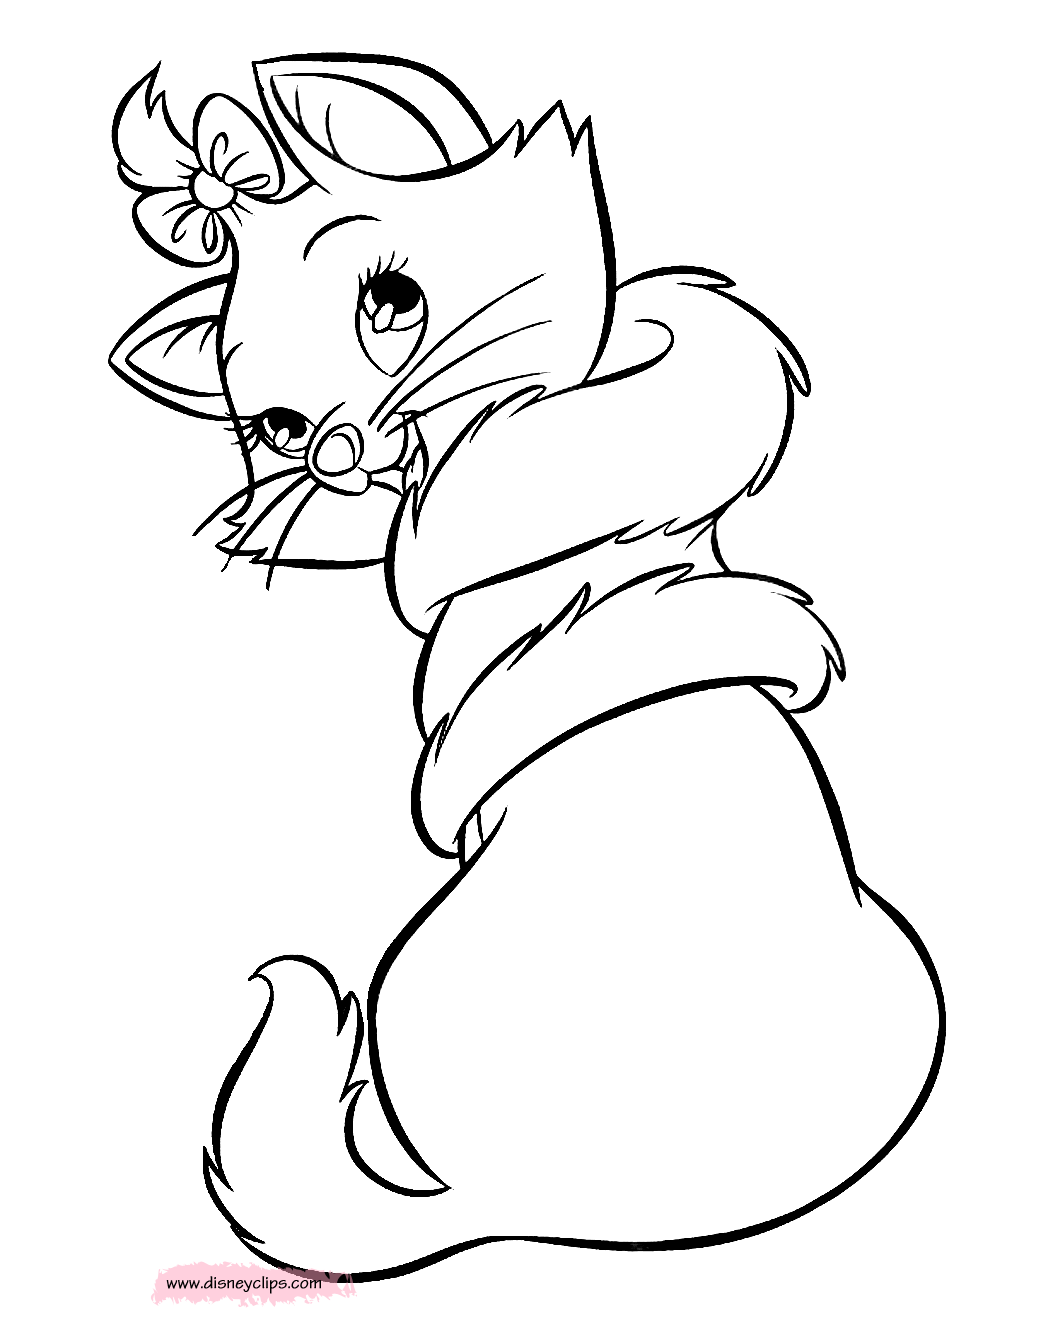 28+ Family Aristocats Coloring Pages Background